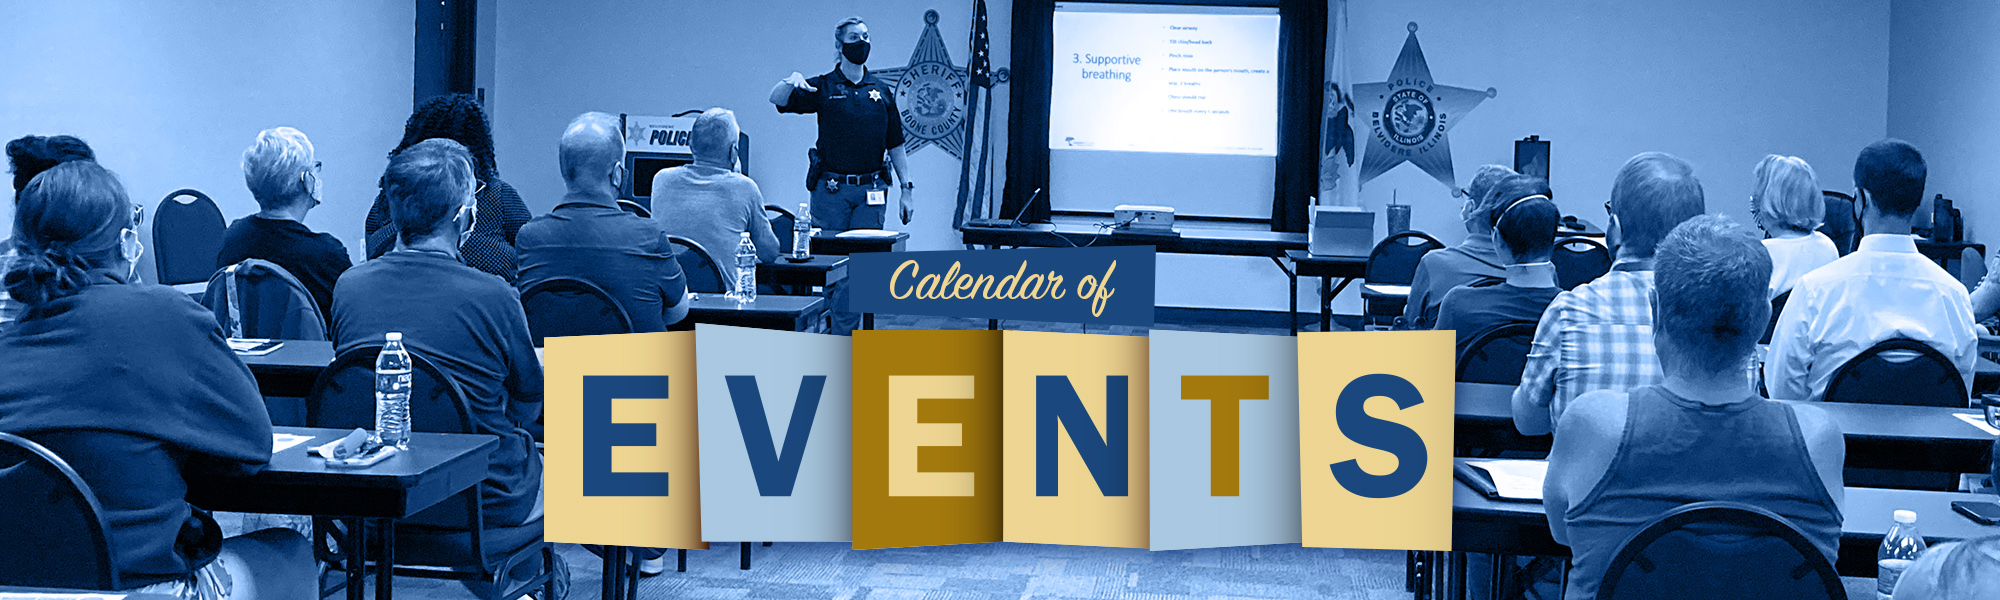 Boone County Behavioral Task Force Events Calendar